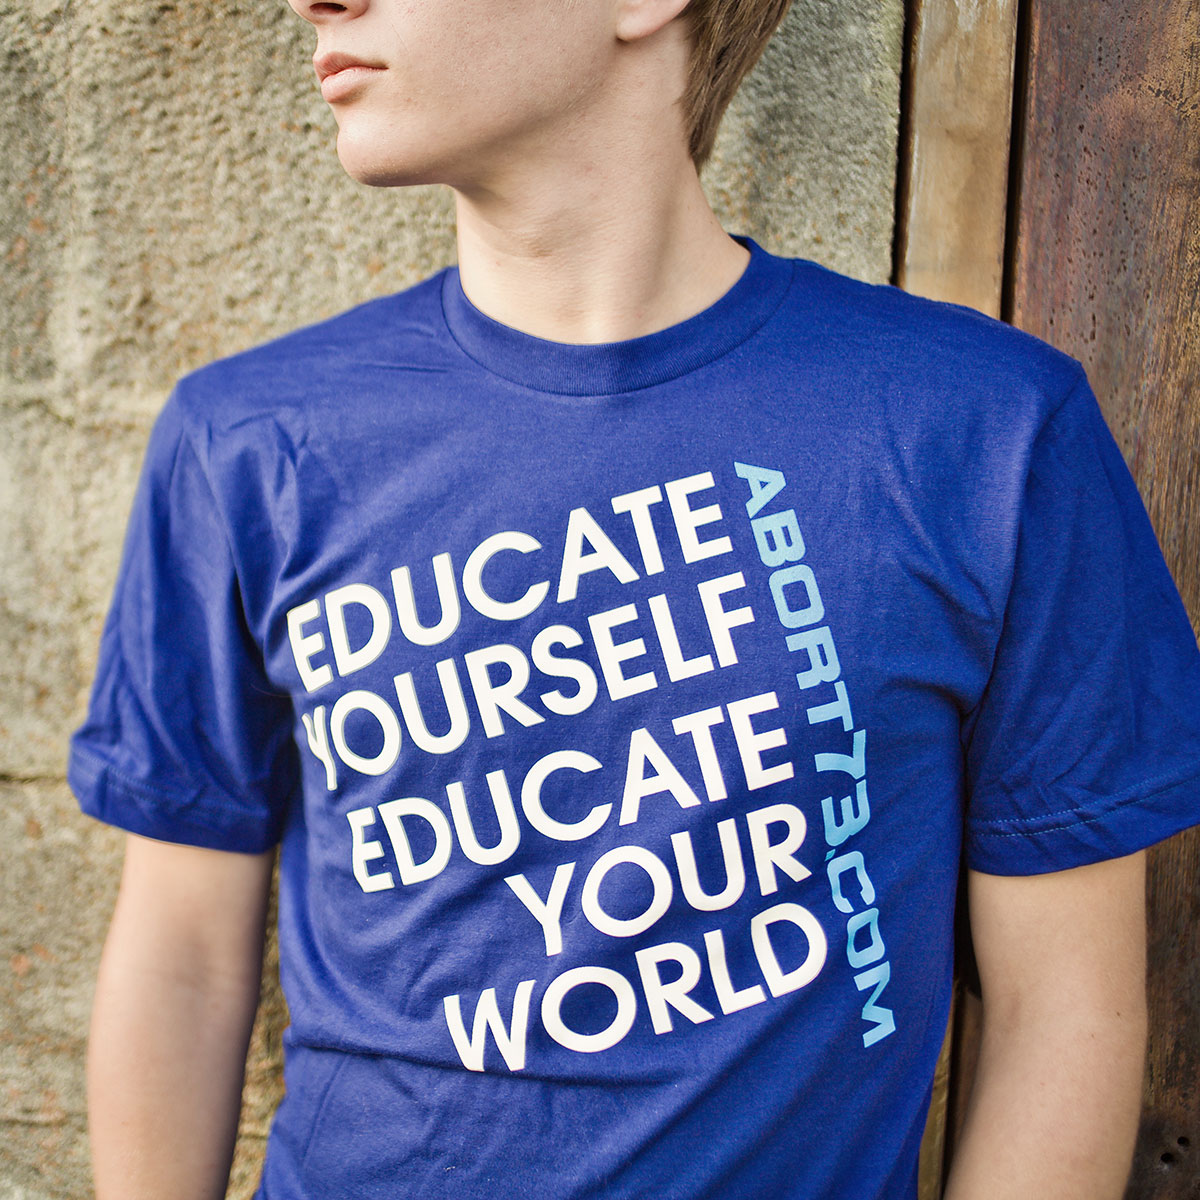 Educate Yourself. Educate Your World. (Abort73 Unisex T-shirt)